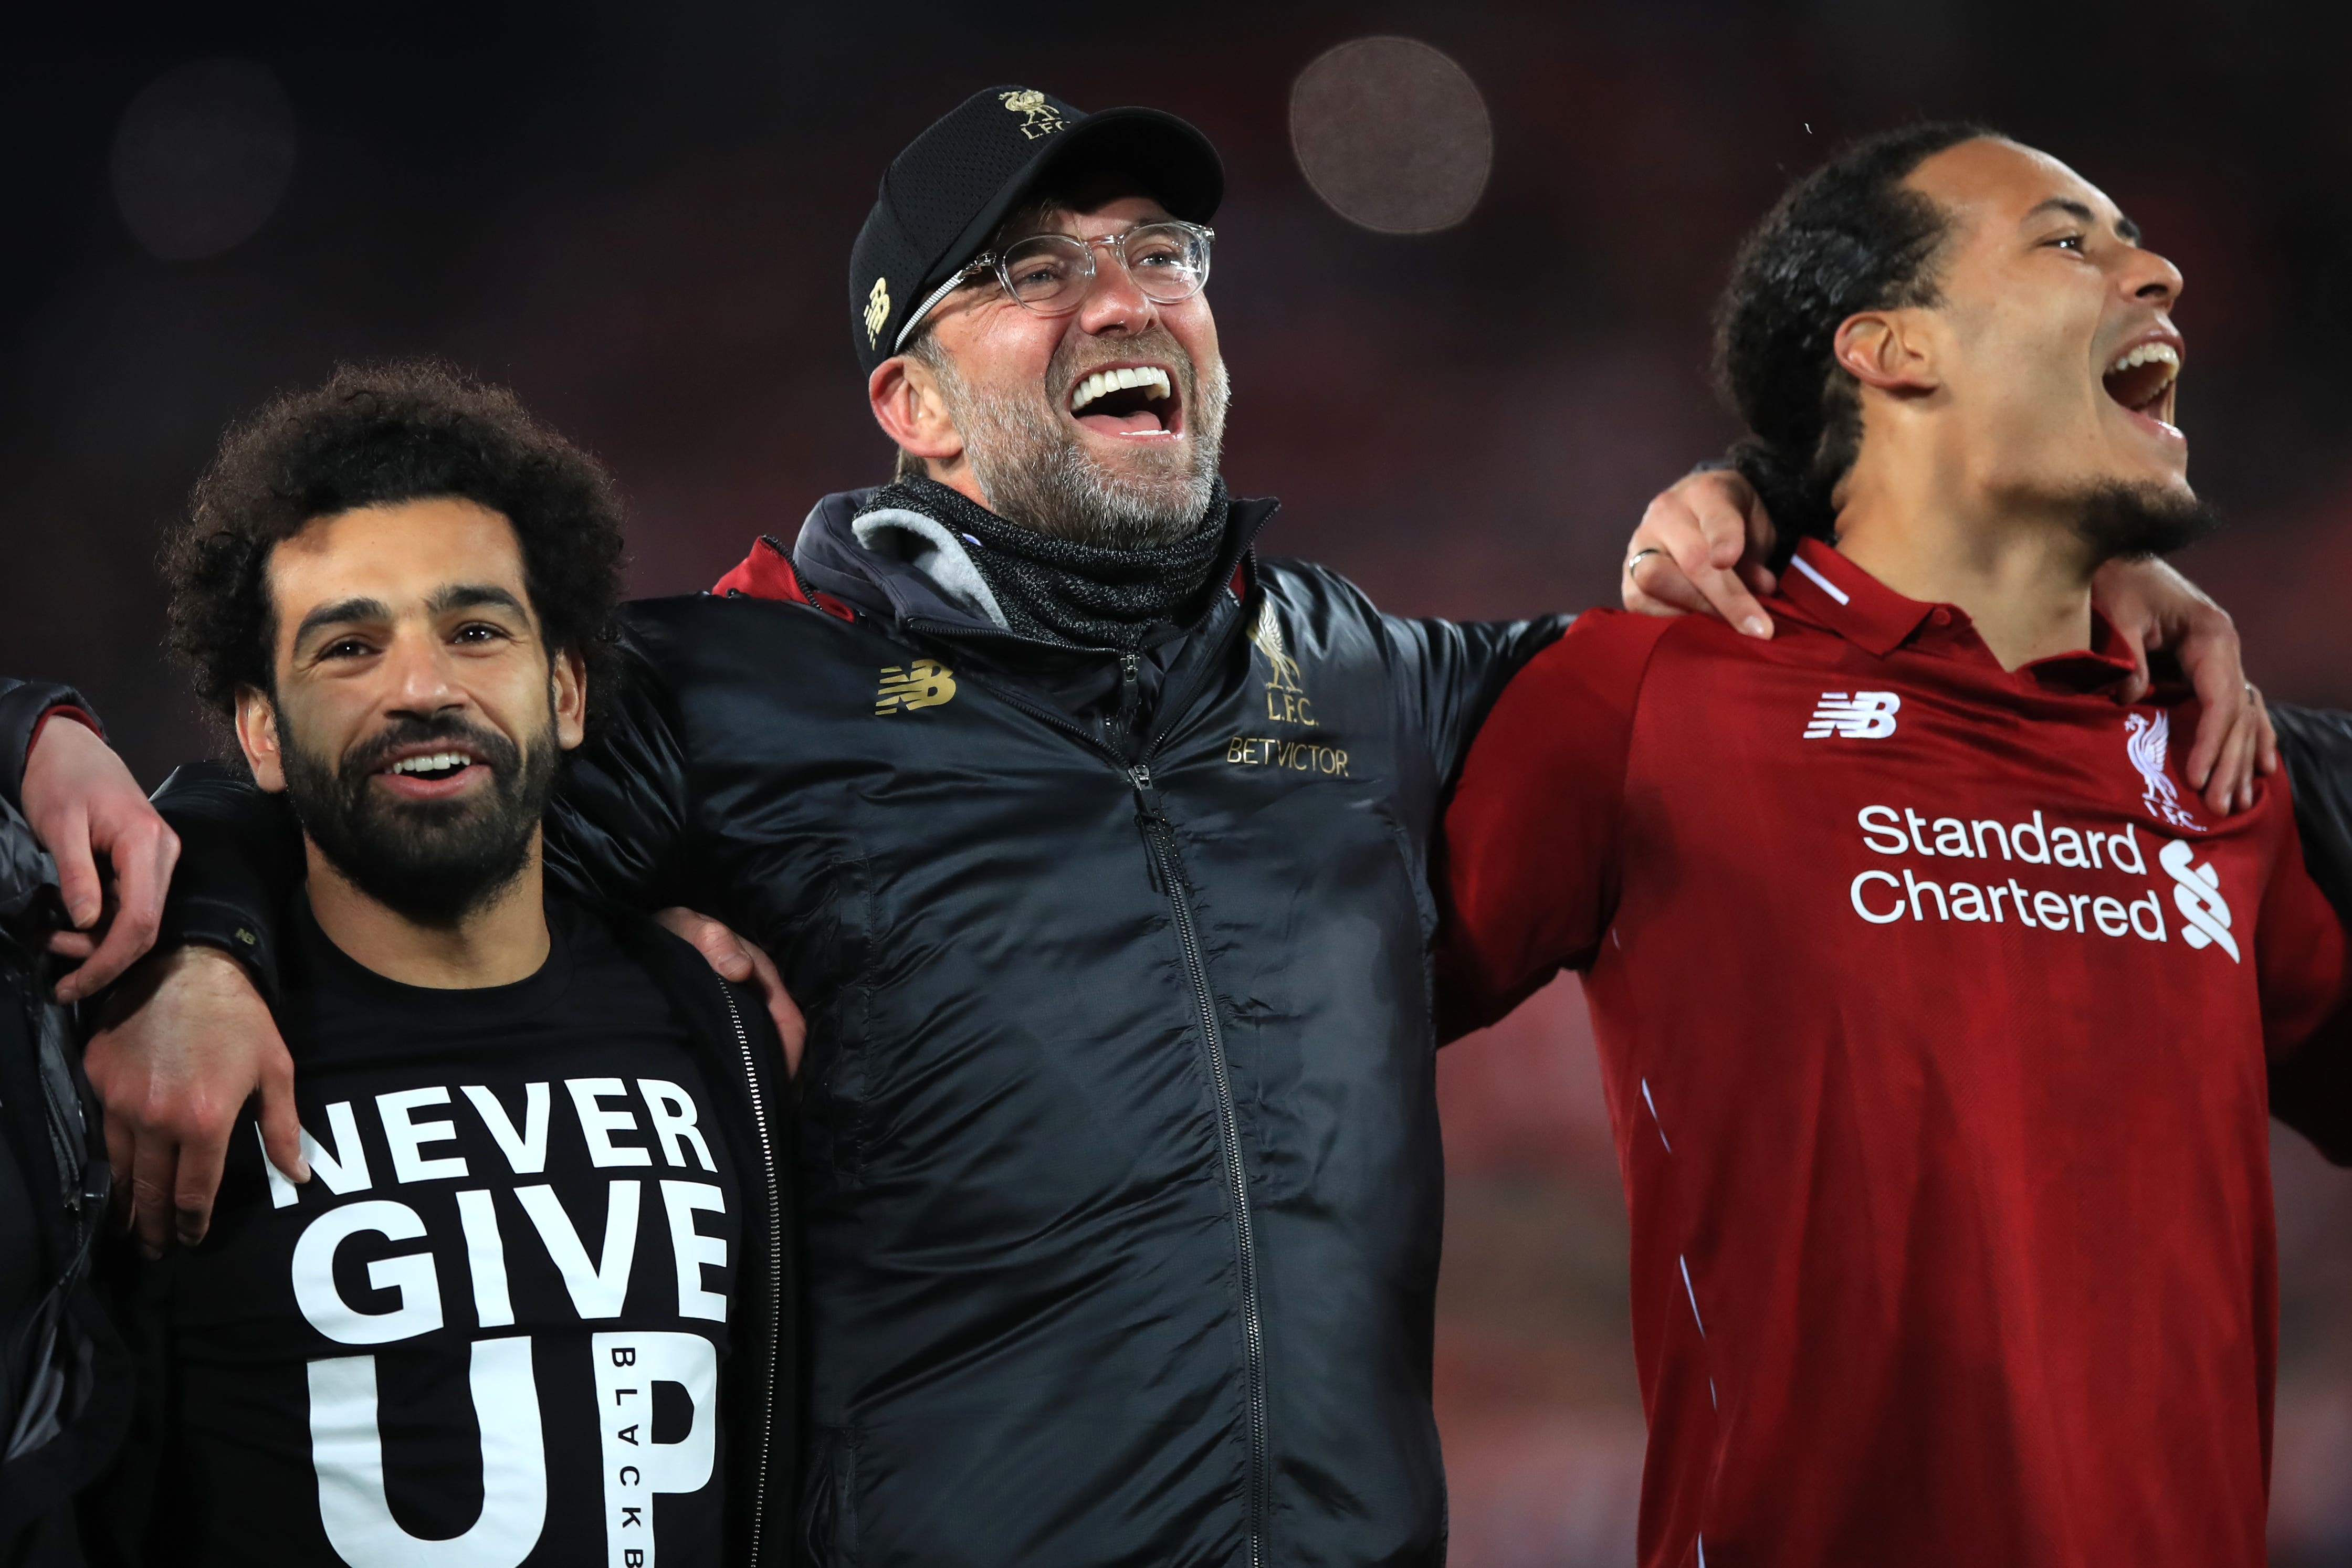 Liverpool’s 4-0 comeback win over Barcelona likely ranks as Klopp’s greatest single moment as Reds boss